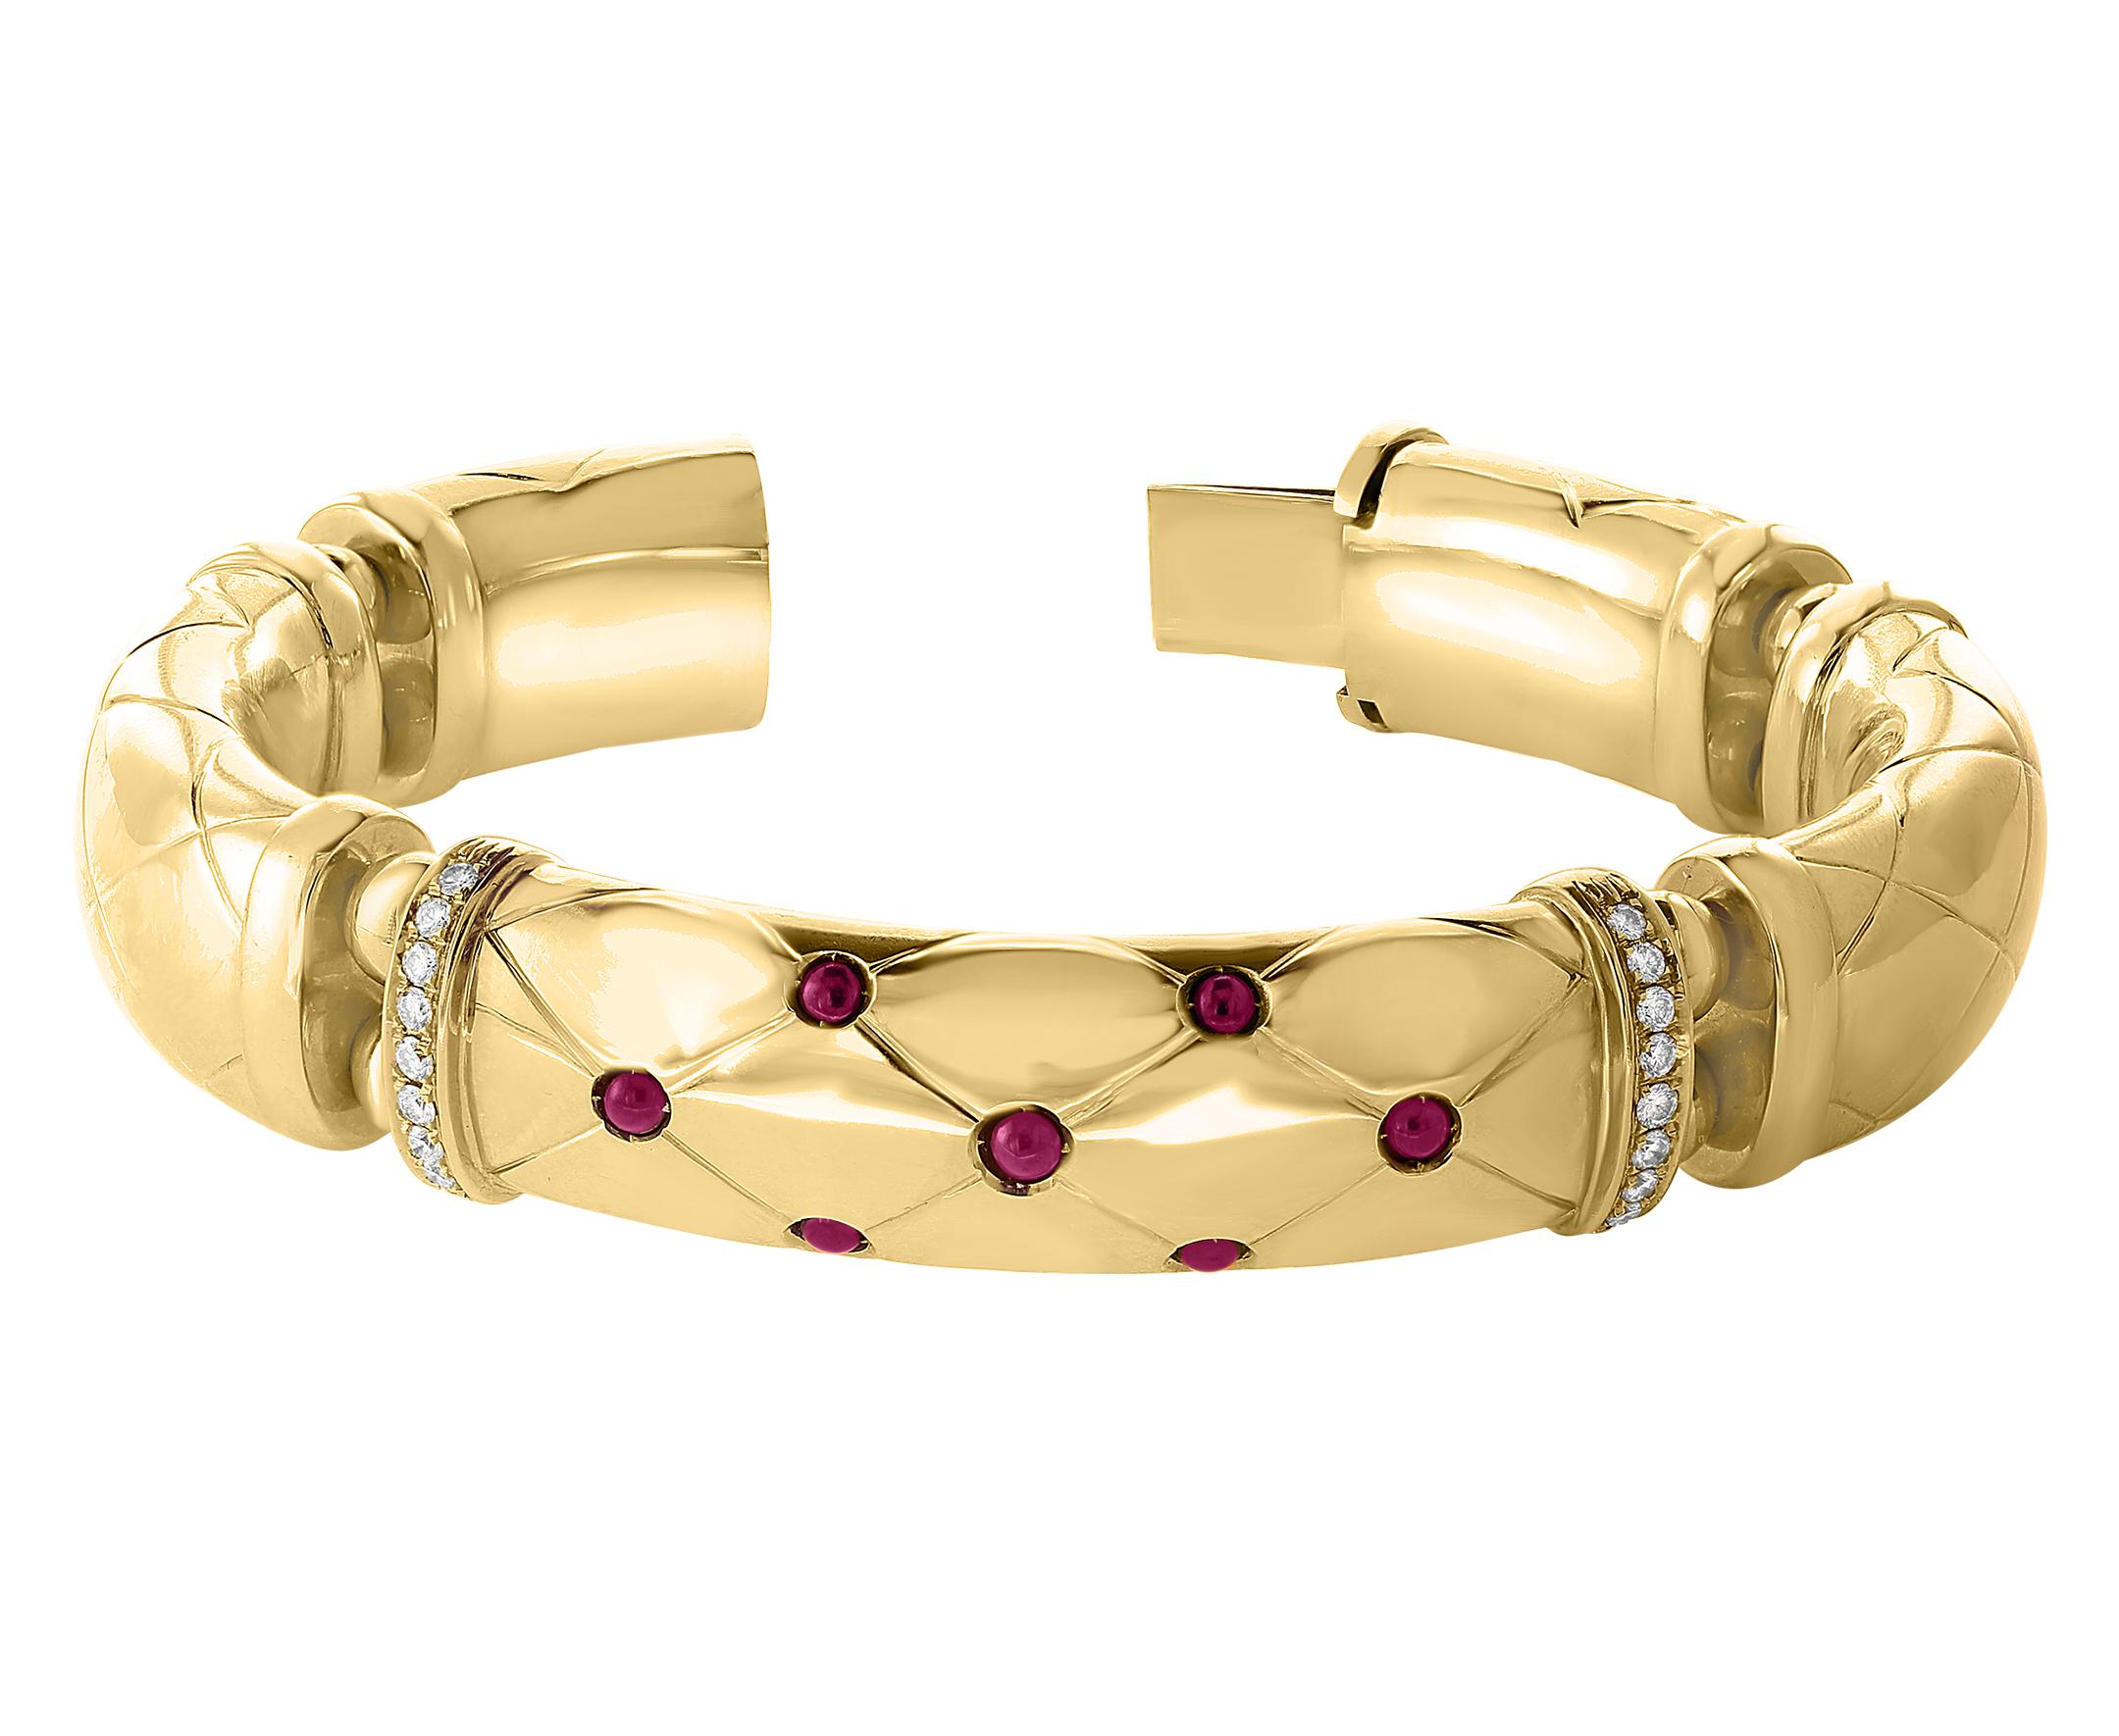  Very Heavy   Bangle  featuring  Ruby   Cabochon  and Diamonds 

18 Karat Yellow Gold 94 Grams 
Authenticity and money back is guaranteed.